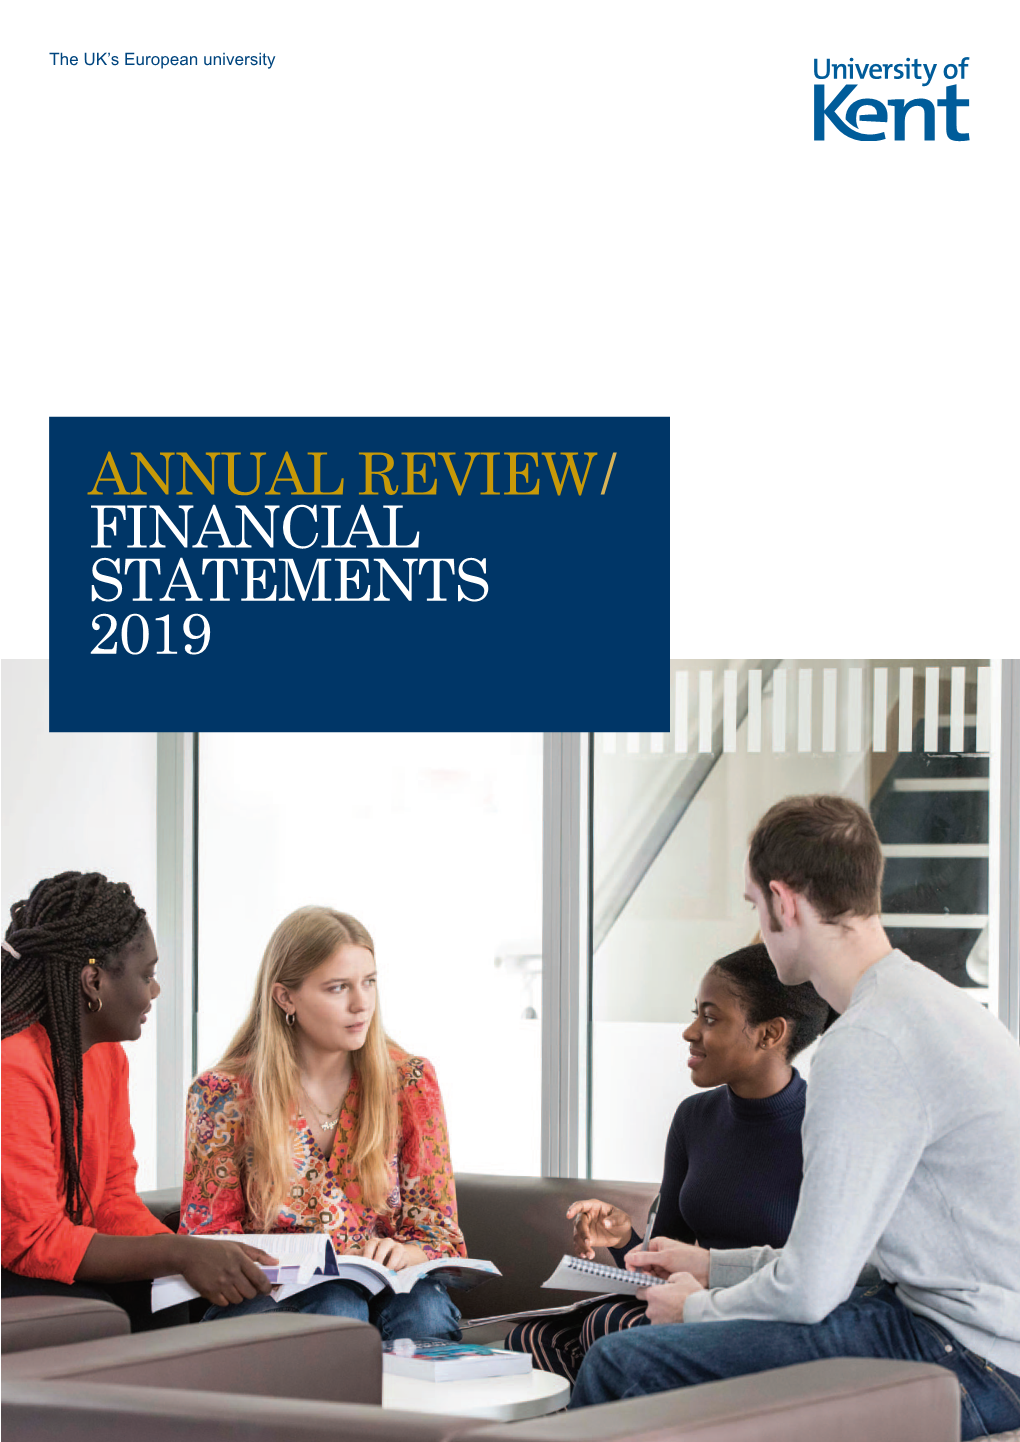 Annual Review/ Financial Statements